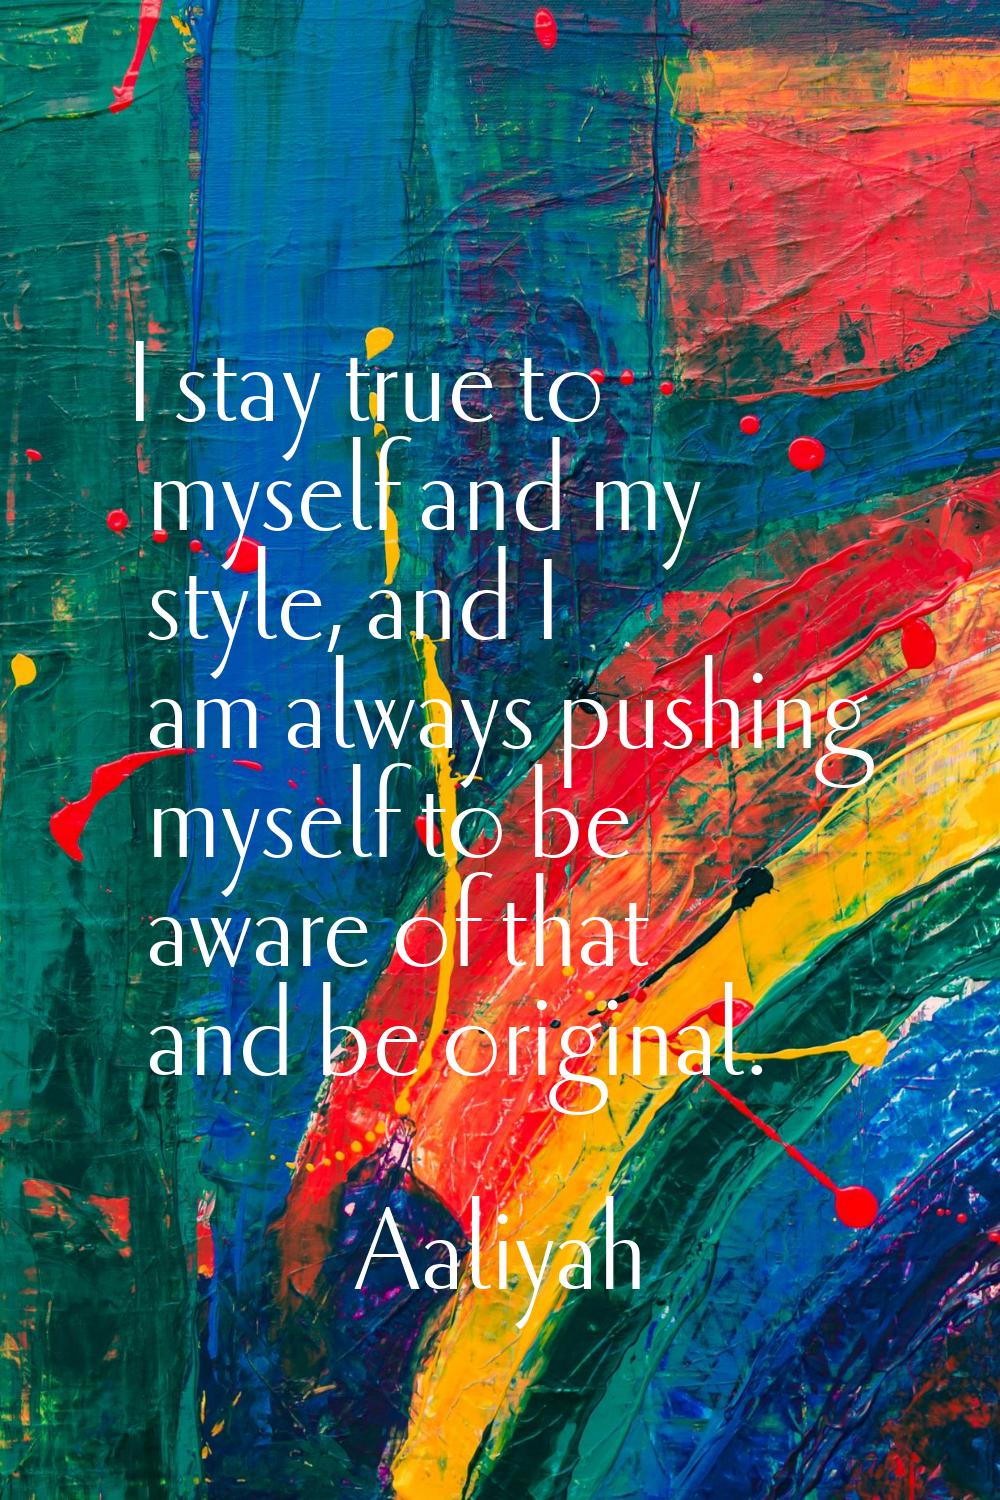 I stay true to myself and my style, and I am always pushing myself to be aware of that and be origi